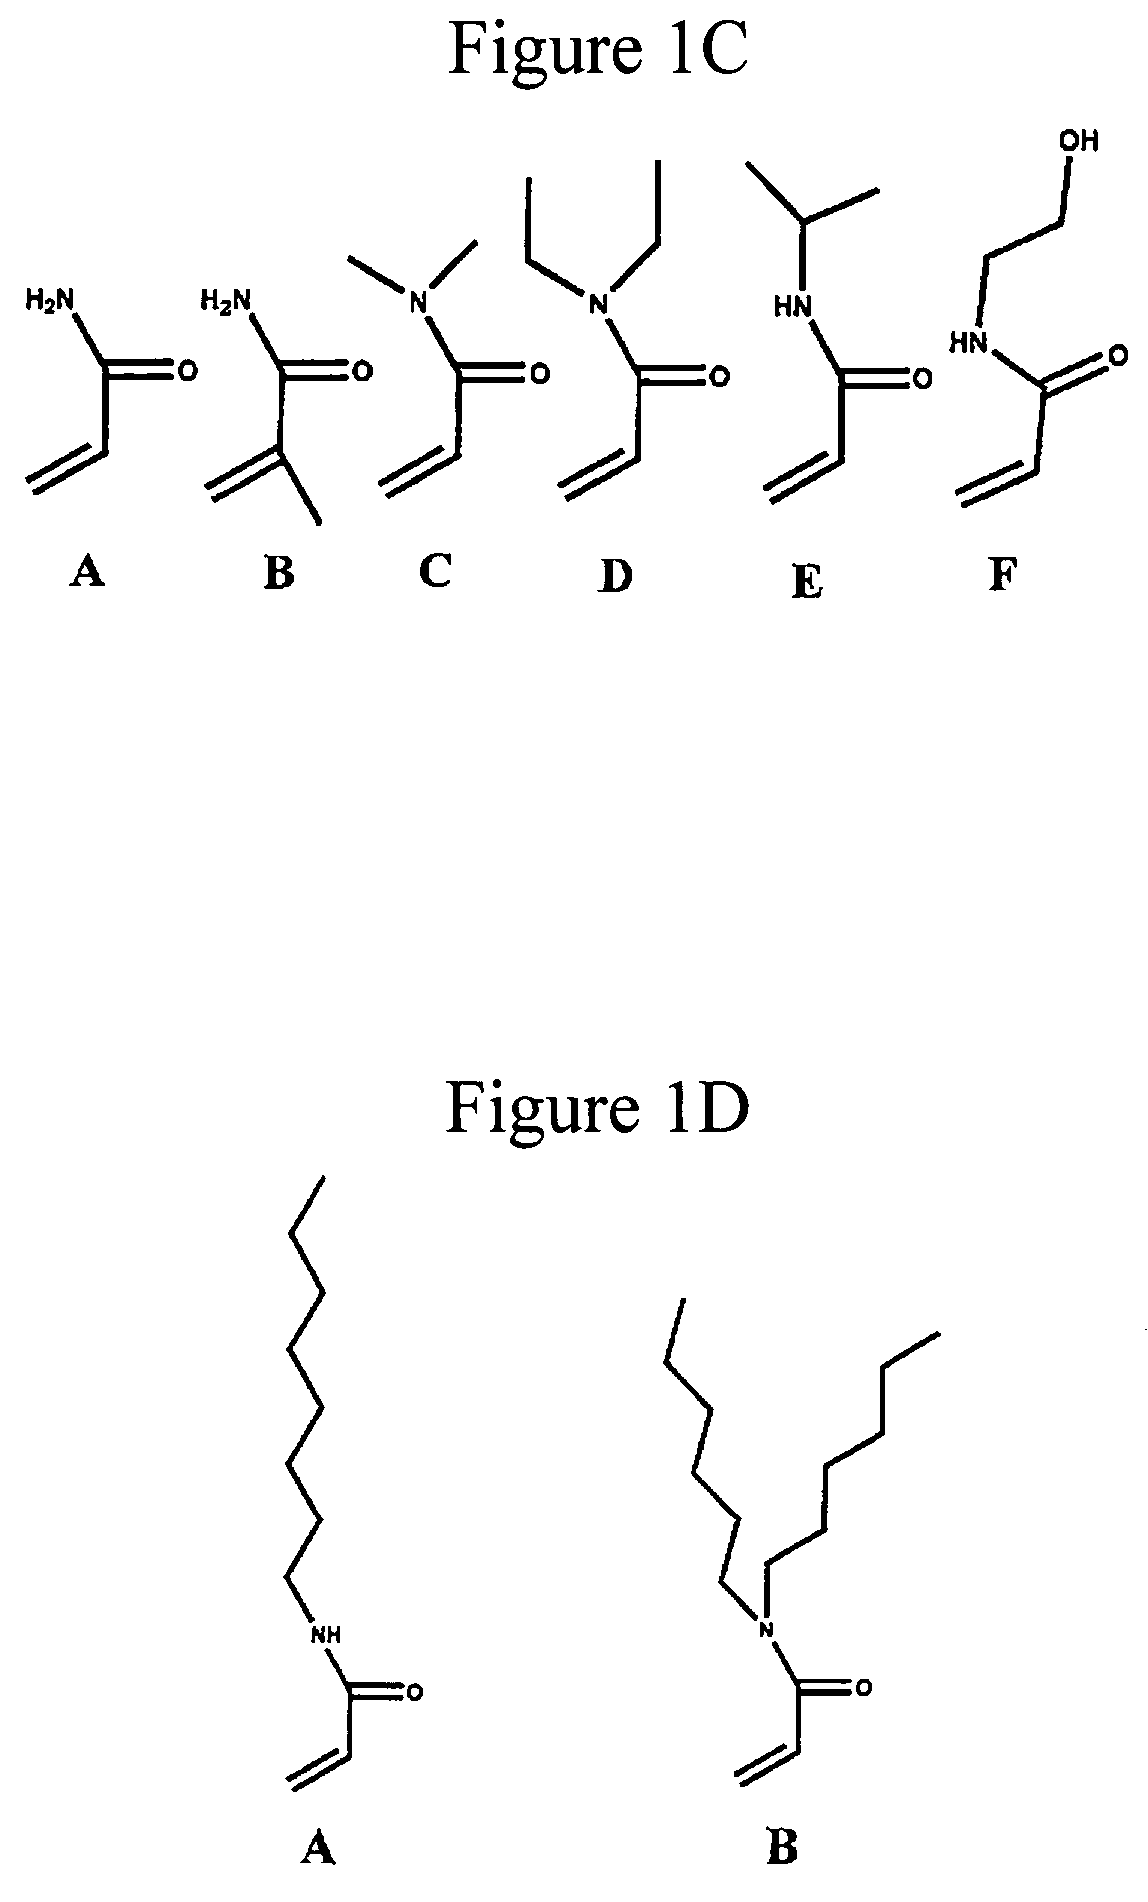 Physically crosslinked copolymer compounds and related compositions and methods for electrophoretic separation